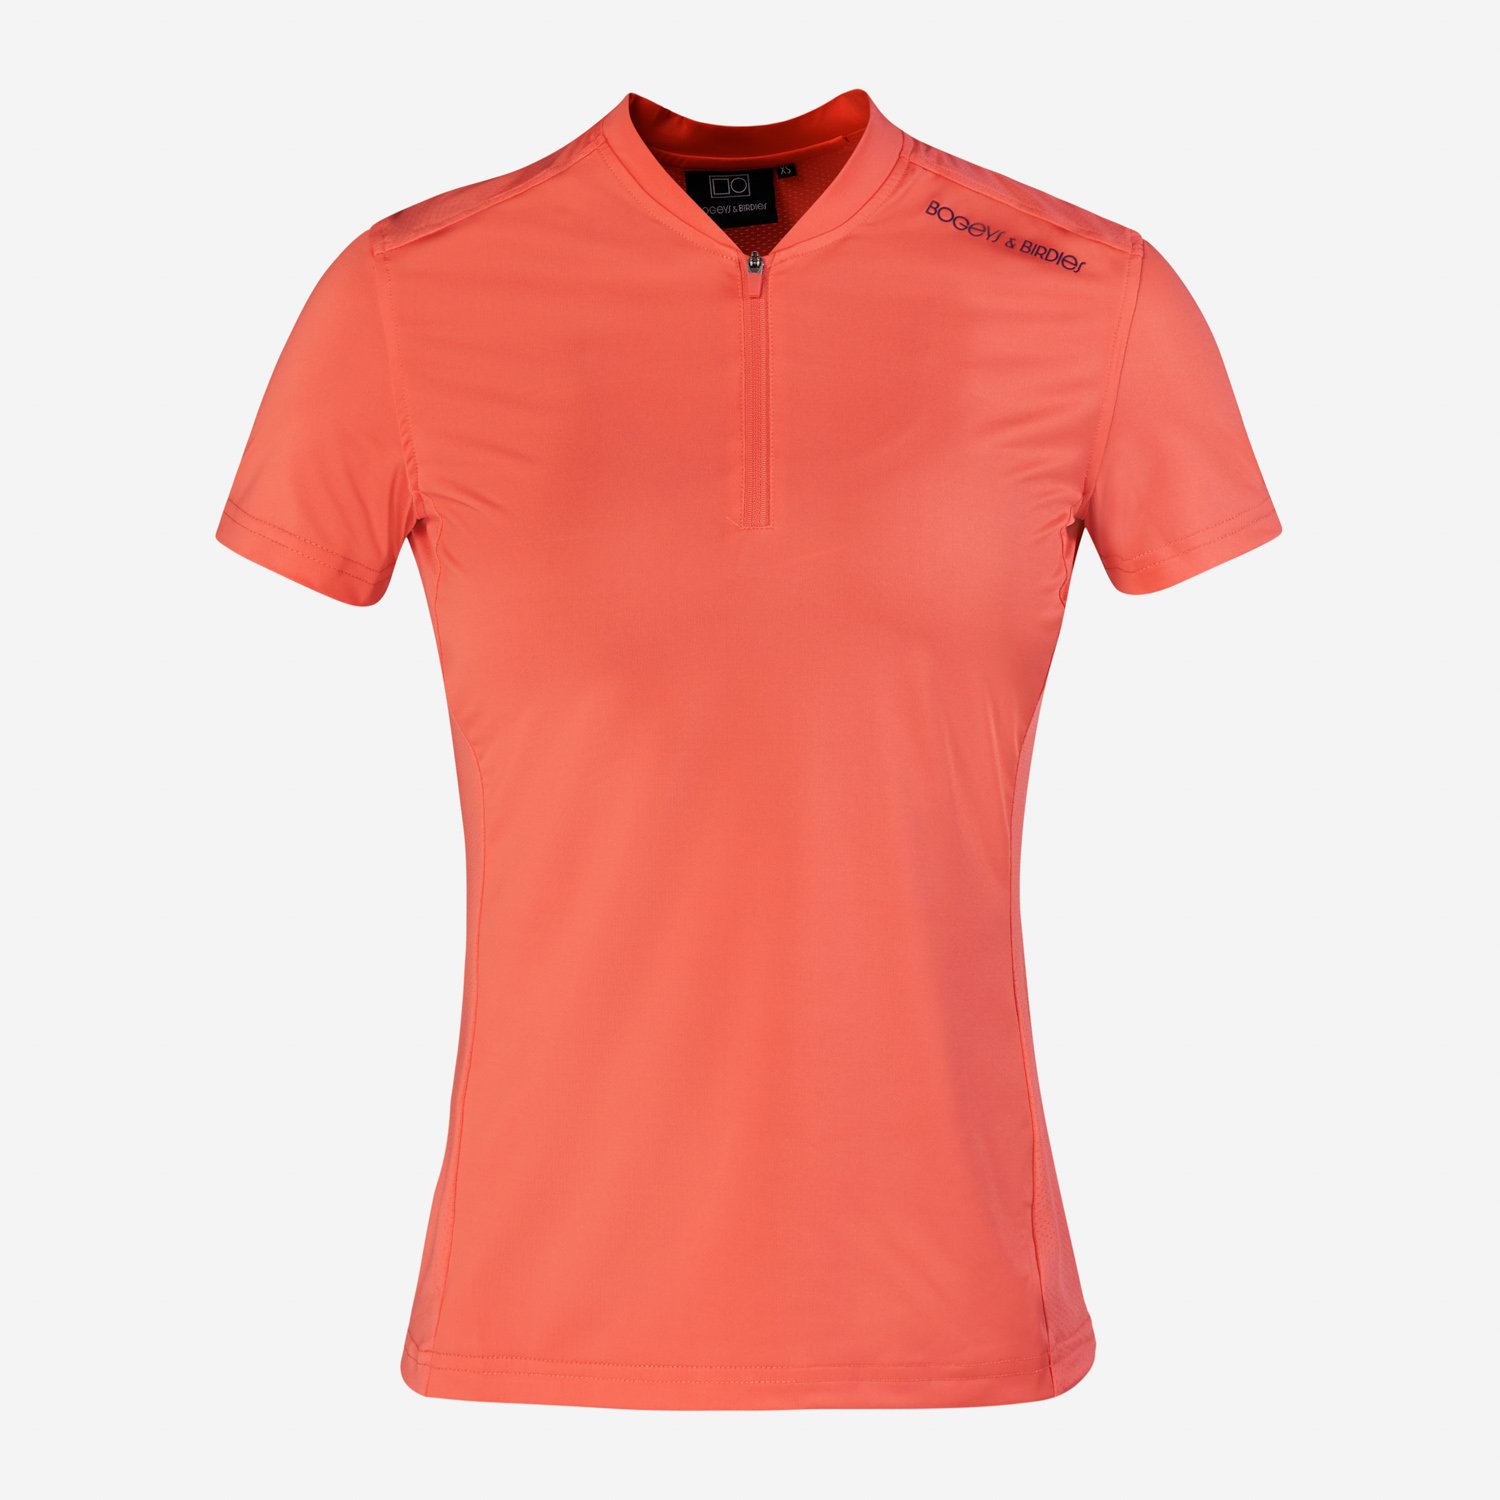 W Tech Blade V-Neck Tee Rouge